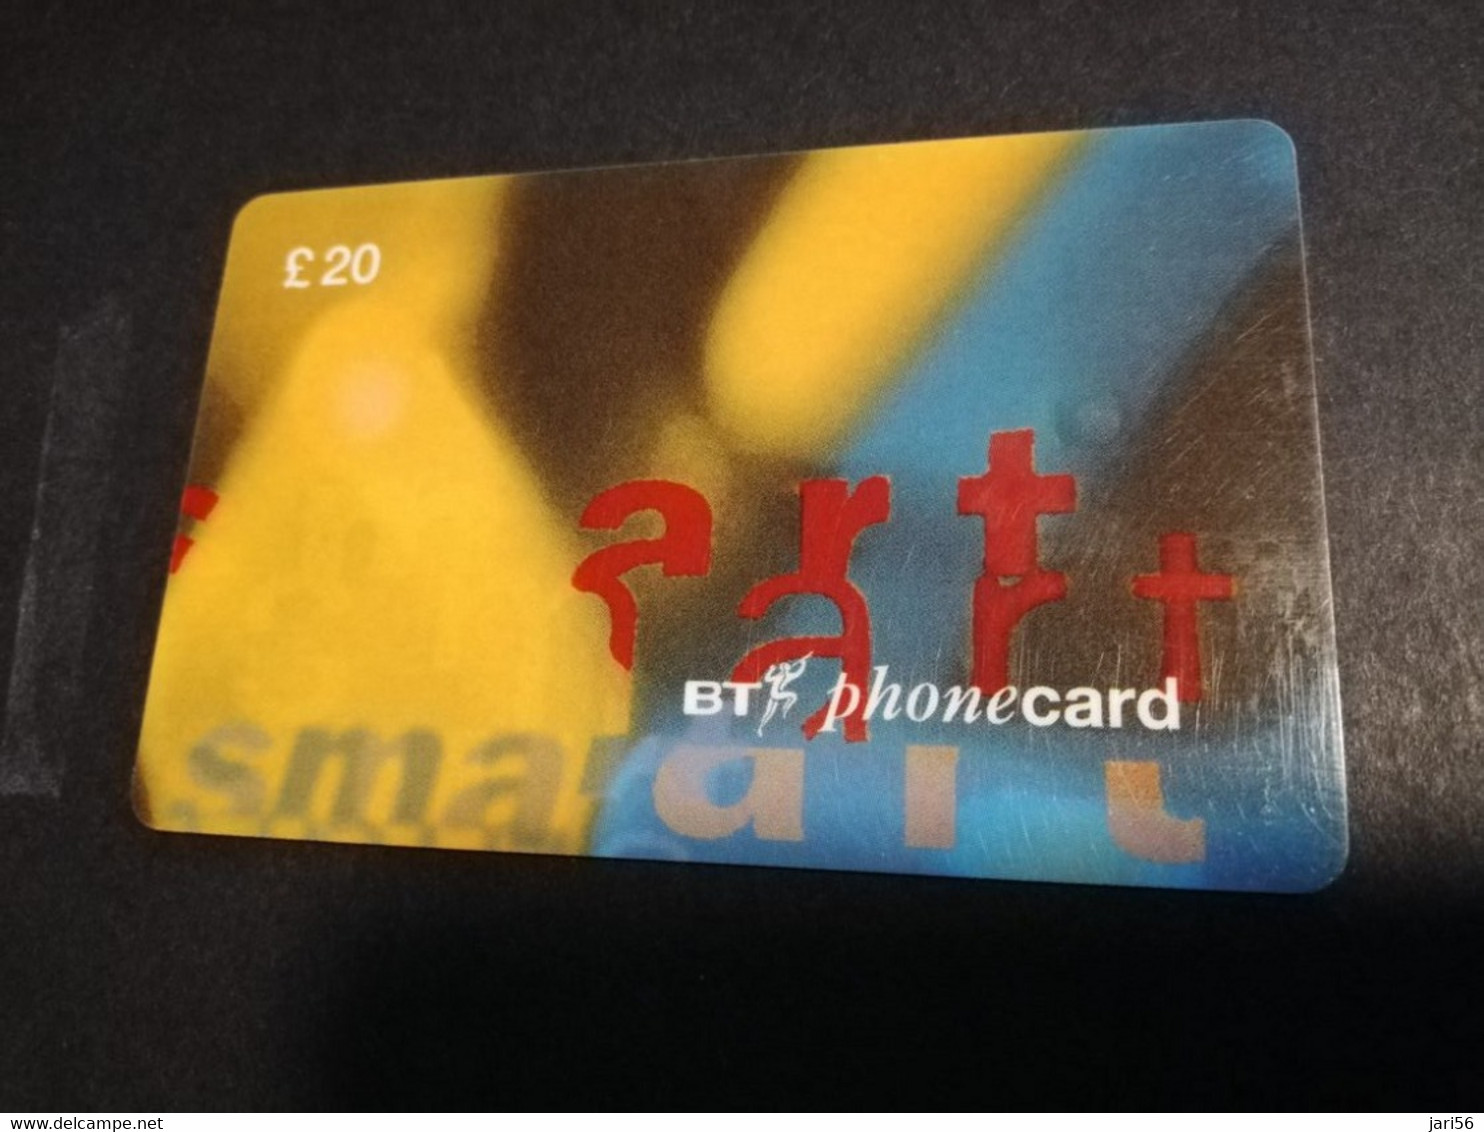 GREAT BRETAGNE  CHIPCARDS / TEST CARD 20 POUND    EXPIRY DATE 09/96   PERFECT  CONDITION     **4599** - BT Algemeen